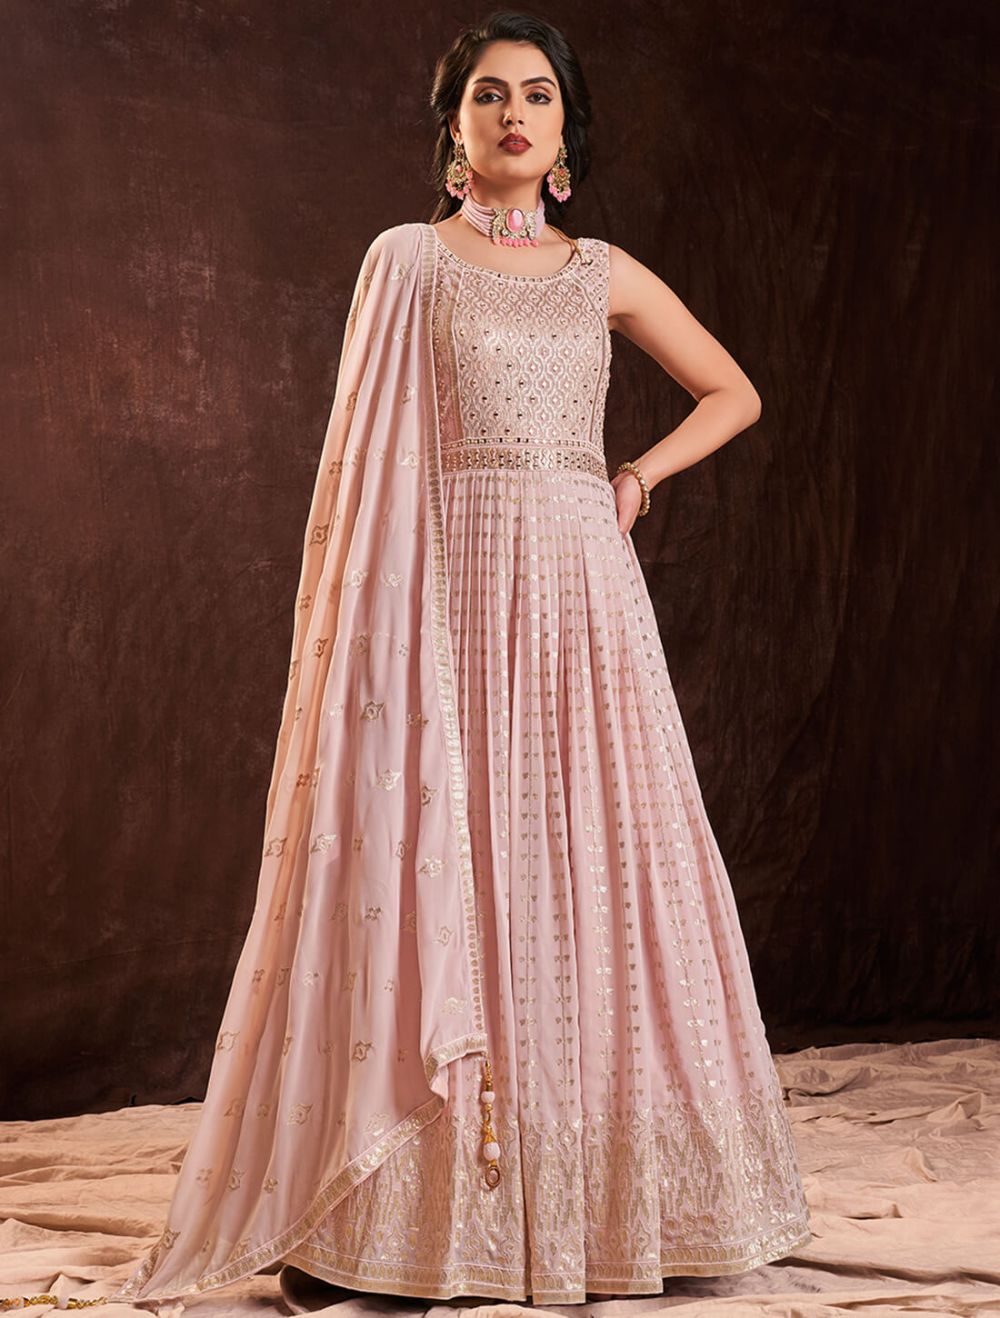 Buy latest gown Fabric online from Arudhhi Shop